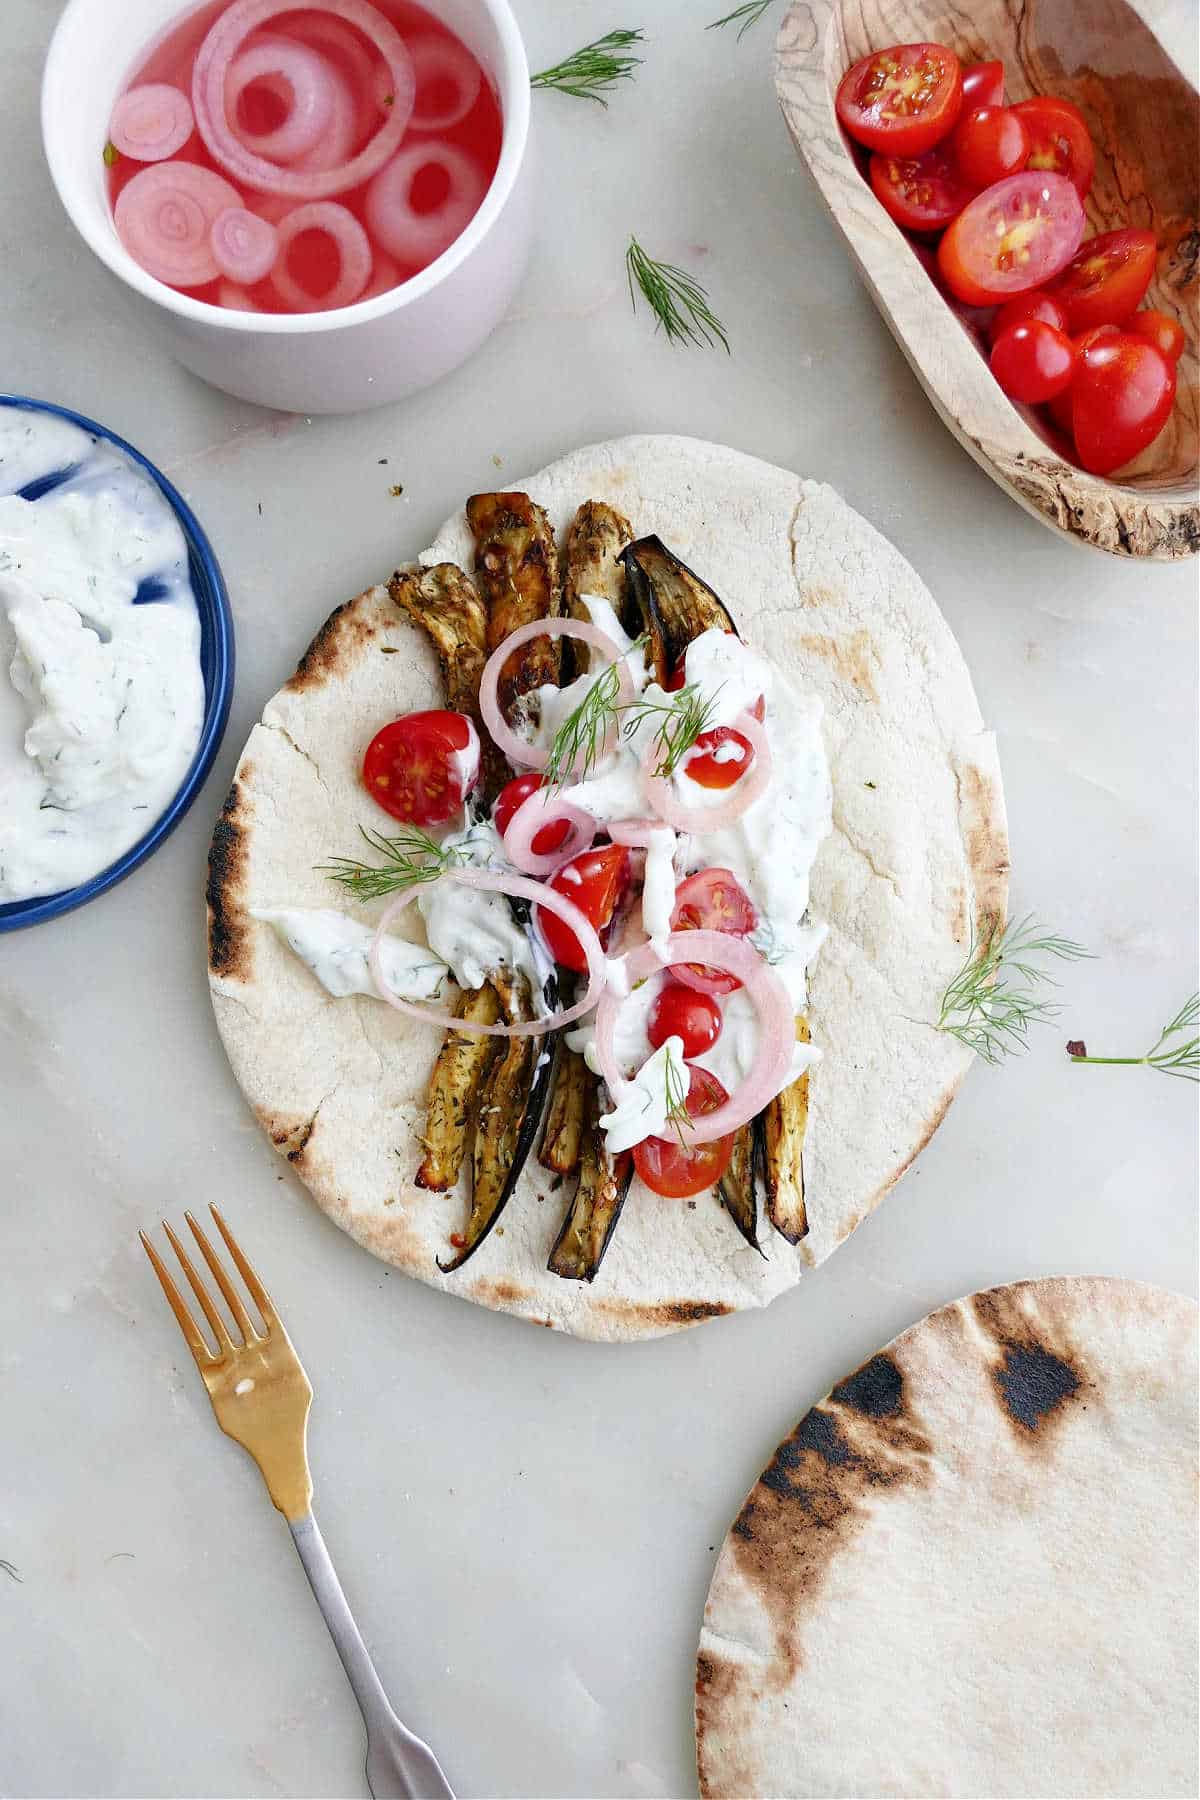 roasted eggplant slices and gyro toppings on a pita next to other ingredients